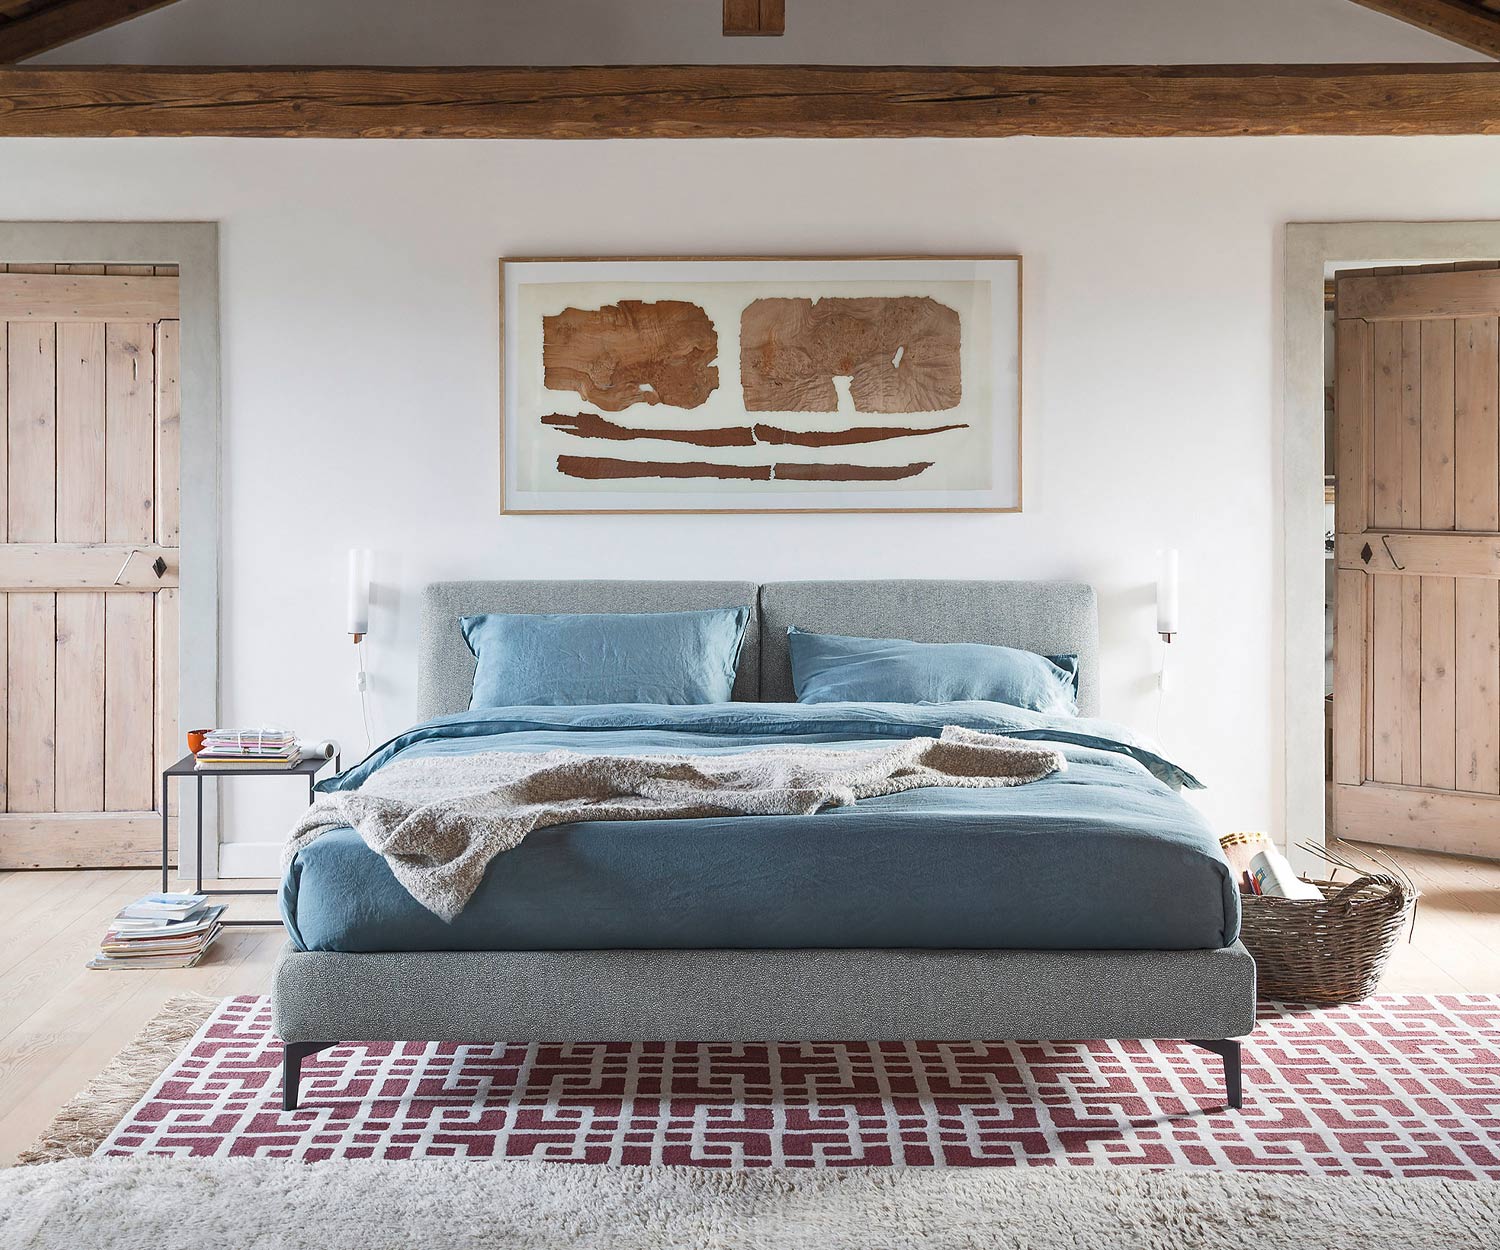 Margot design bed from Novamobili in the old building bedroom grey fabric cover